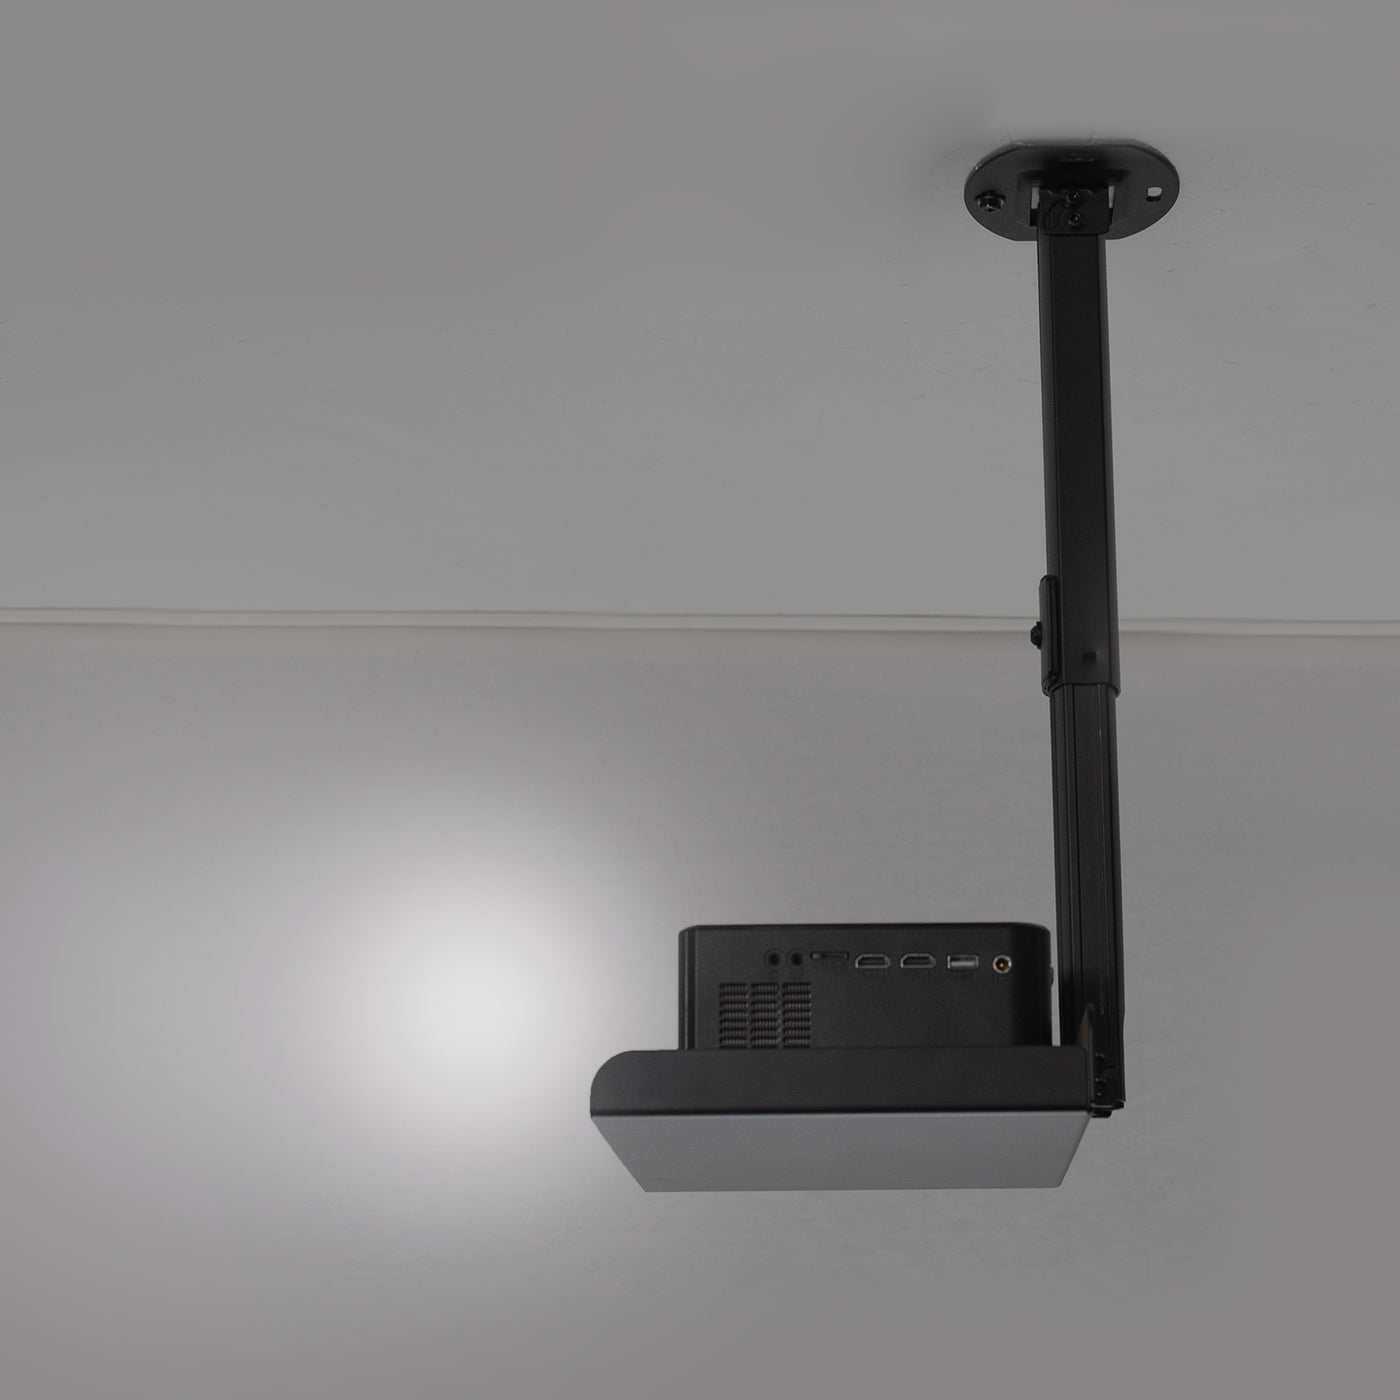 Ceiling shelf mount pole supporting a projector.